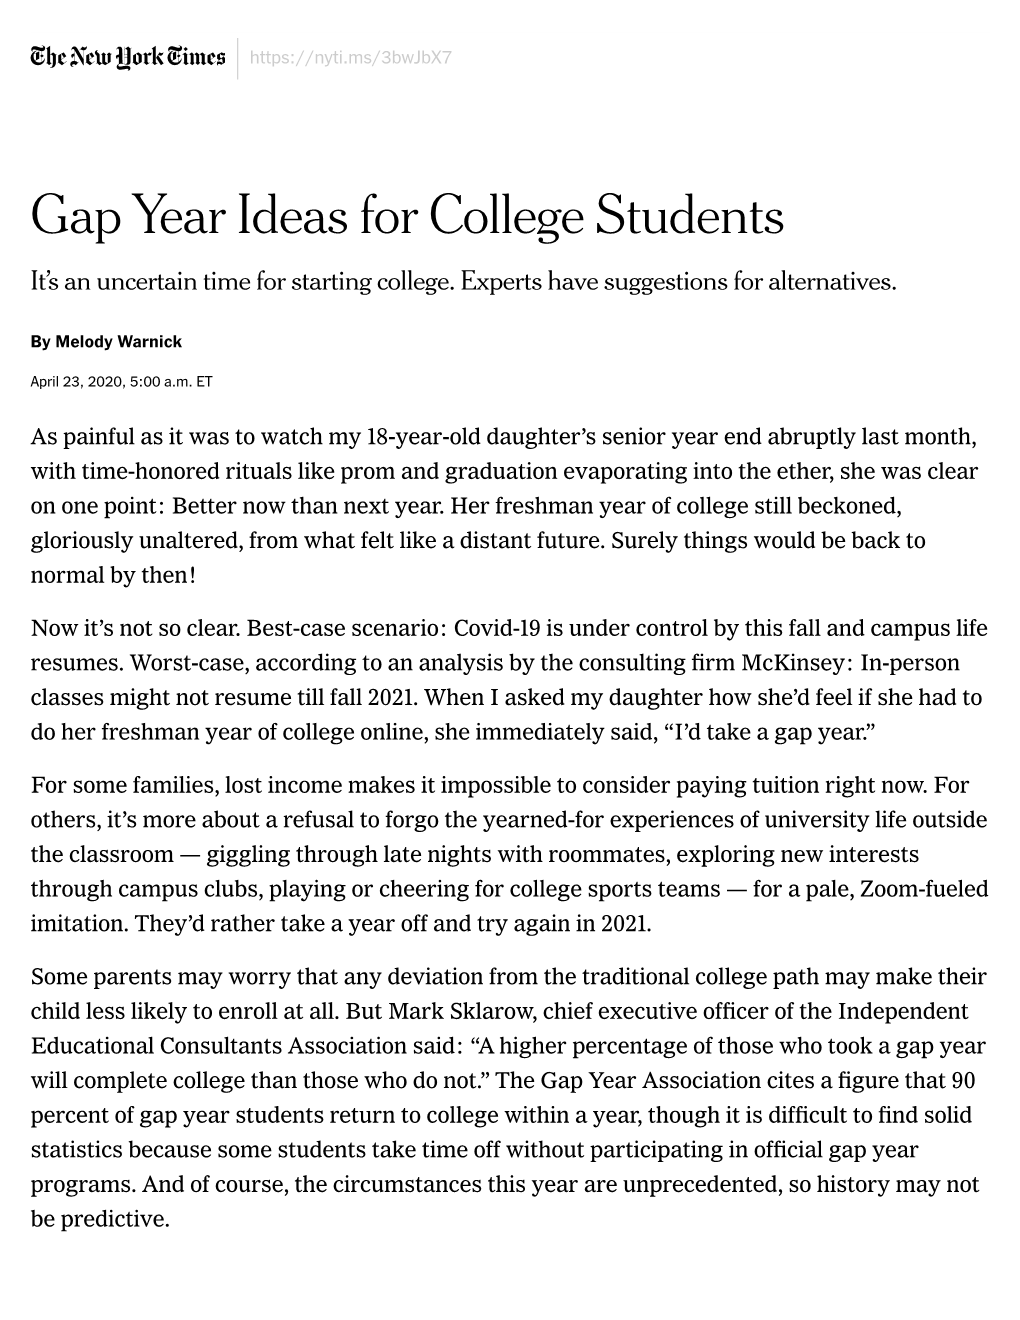 Gap Year Ideas for College Students It’S an Uncertain Time for Starting College